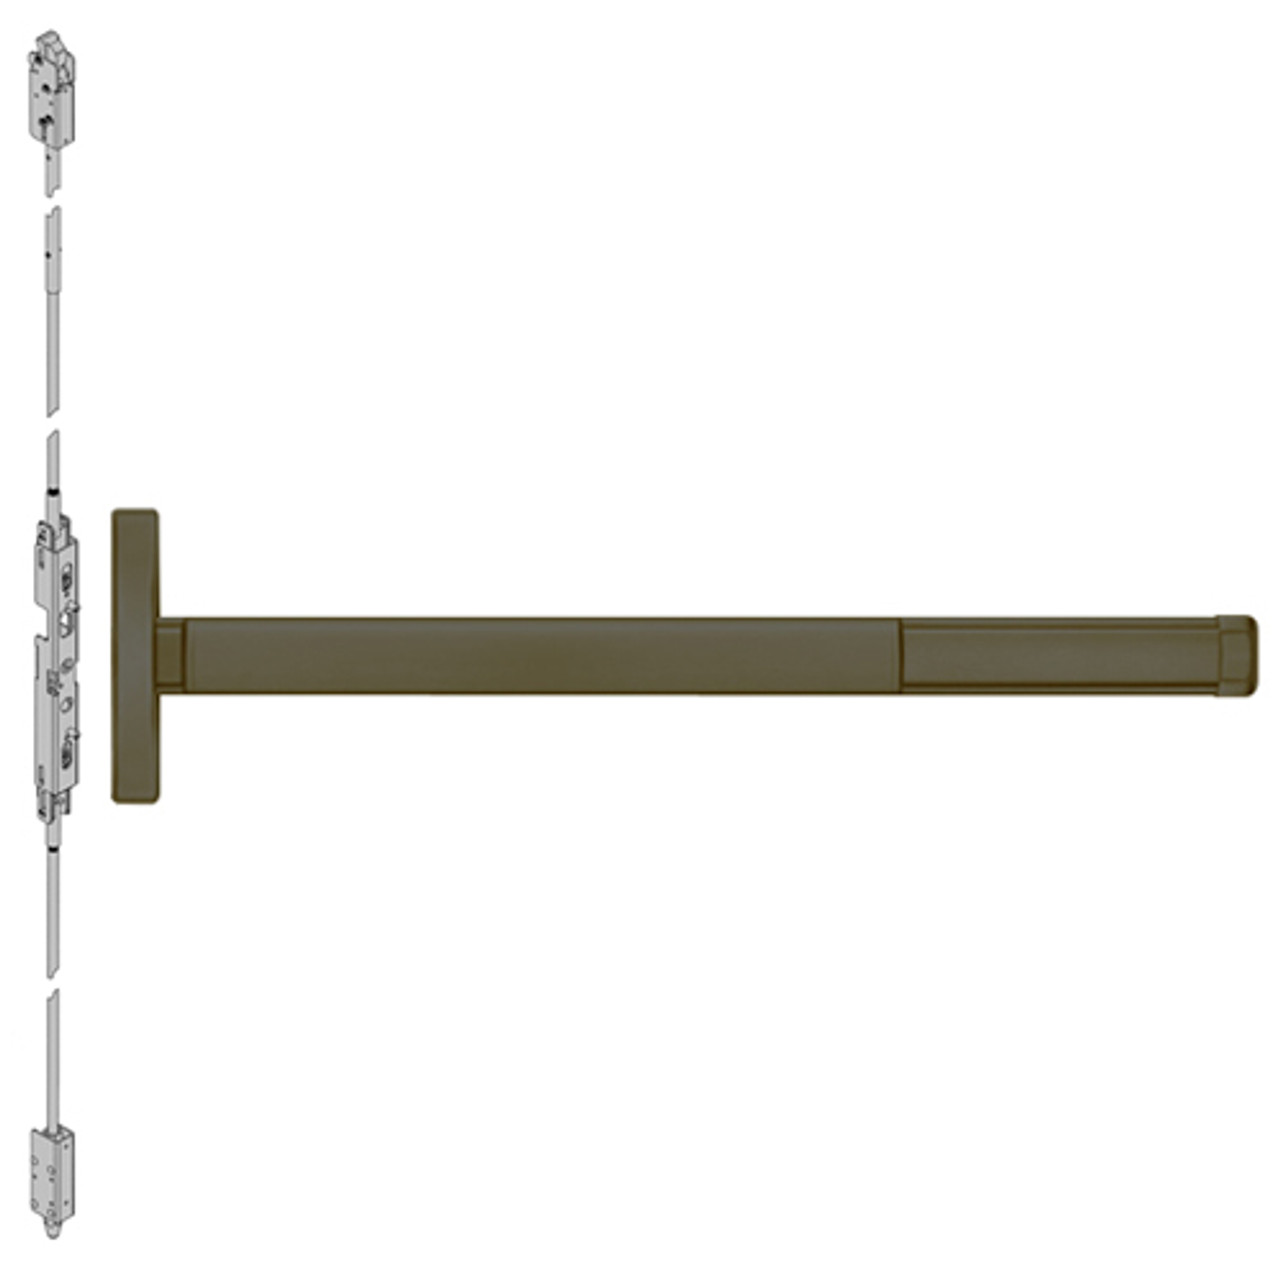 MLRFL2614-613-48 PHI 2600 Series Fire Rated Concealed Vertical Rod Exit Device with Motorized Latch Retraction Prepped for Lever Always Active in Oil Rubbed Bronze Finish